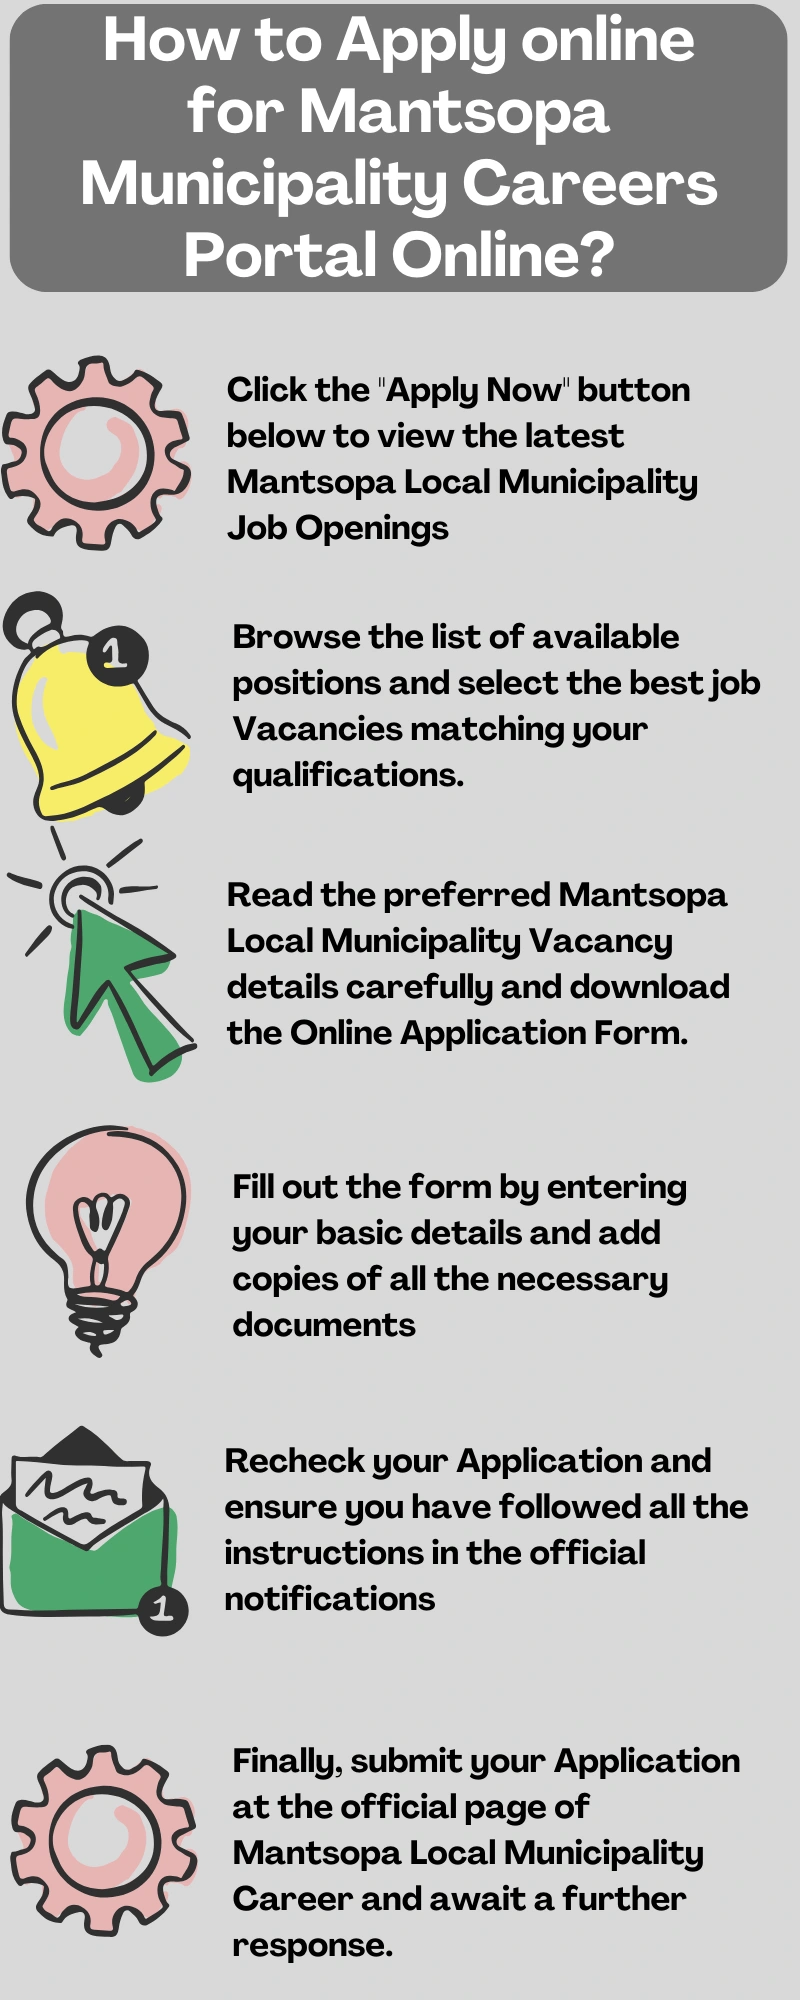 How to Apply online for Mantsopa Municipality Careers Portal Online?